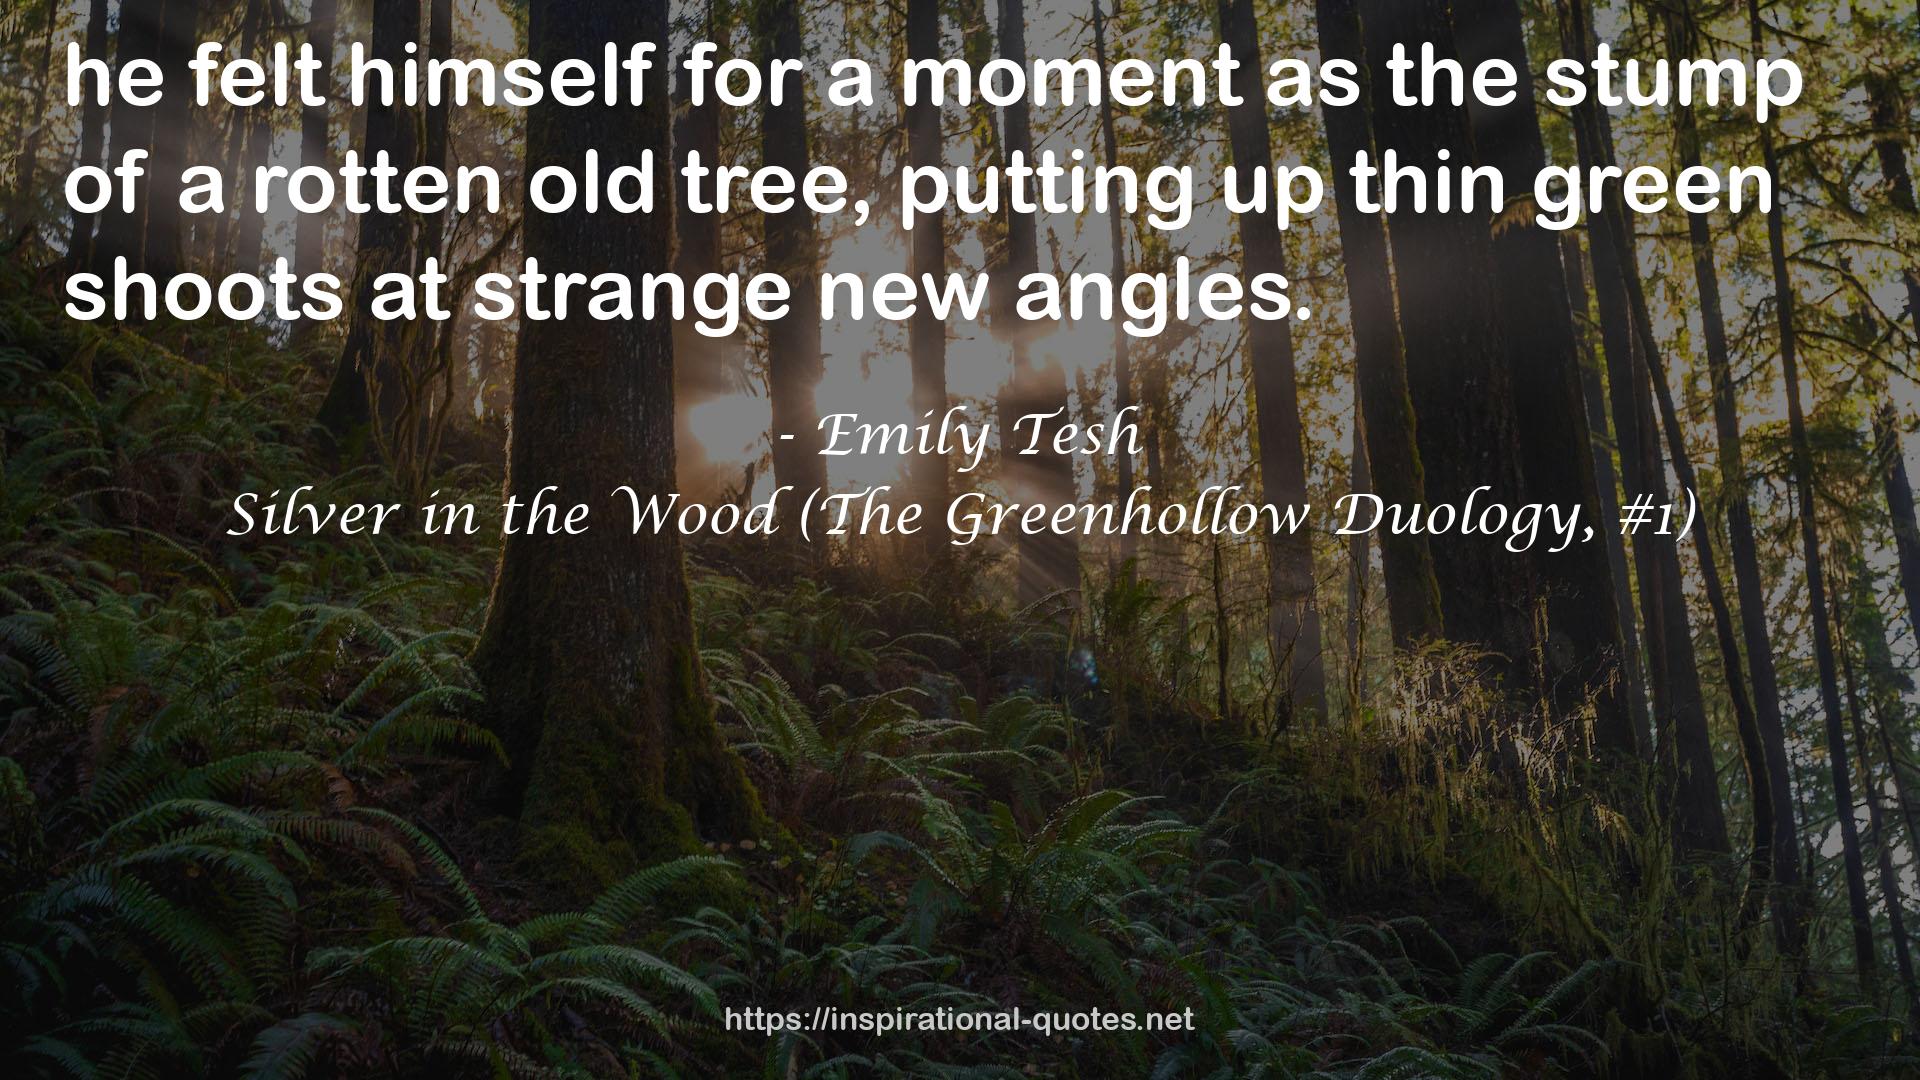 Silver in the Wood (The Greenhollow Duology, #1) QUOTES